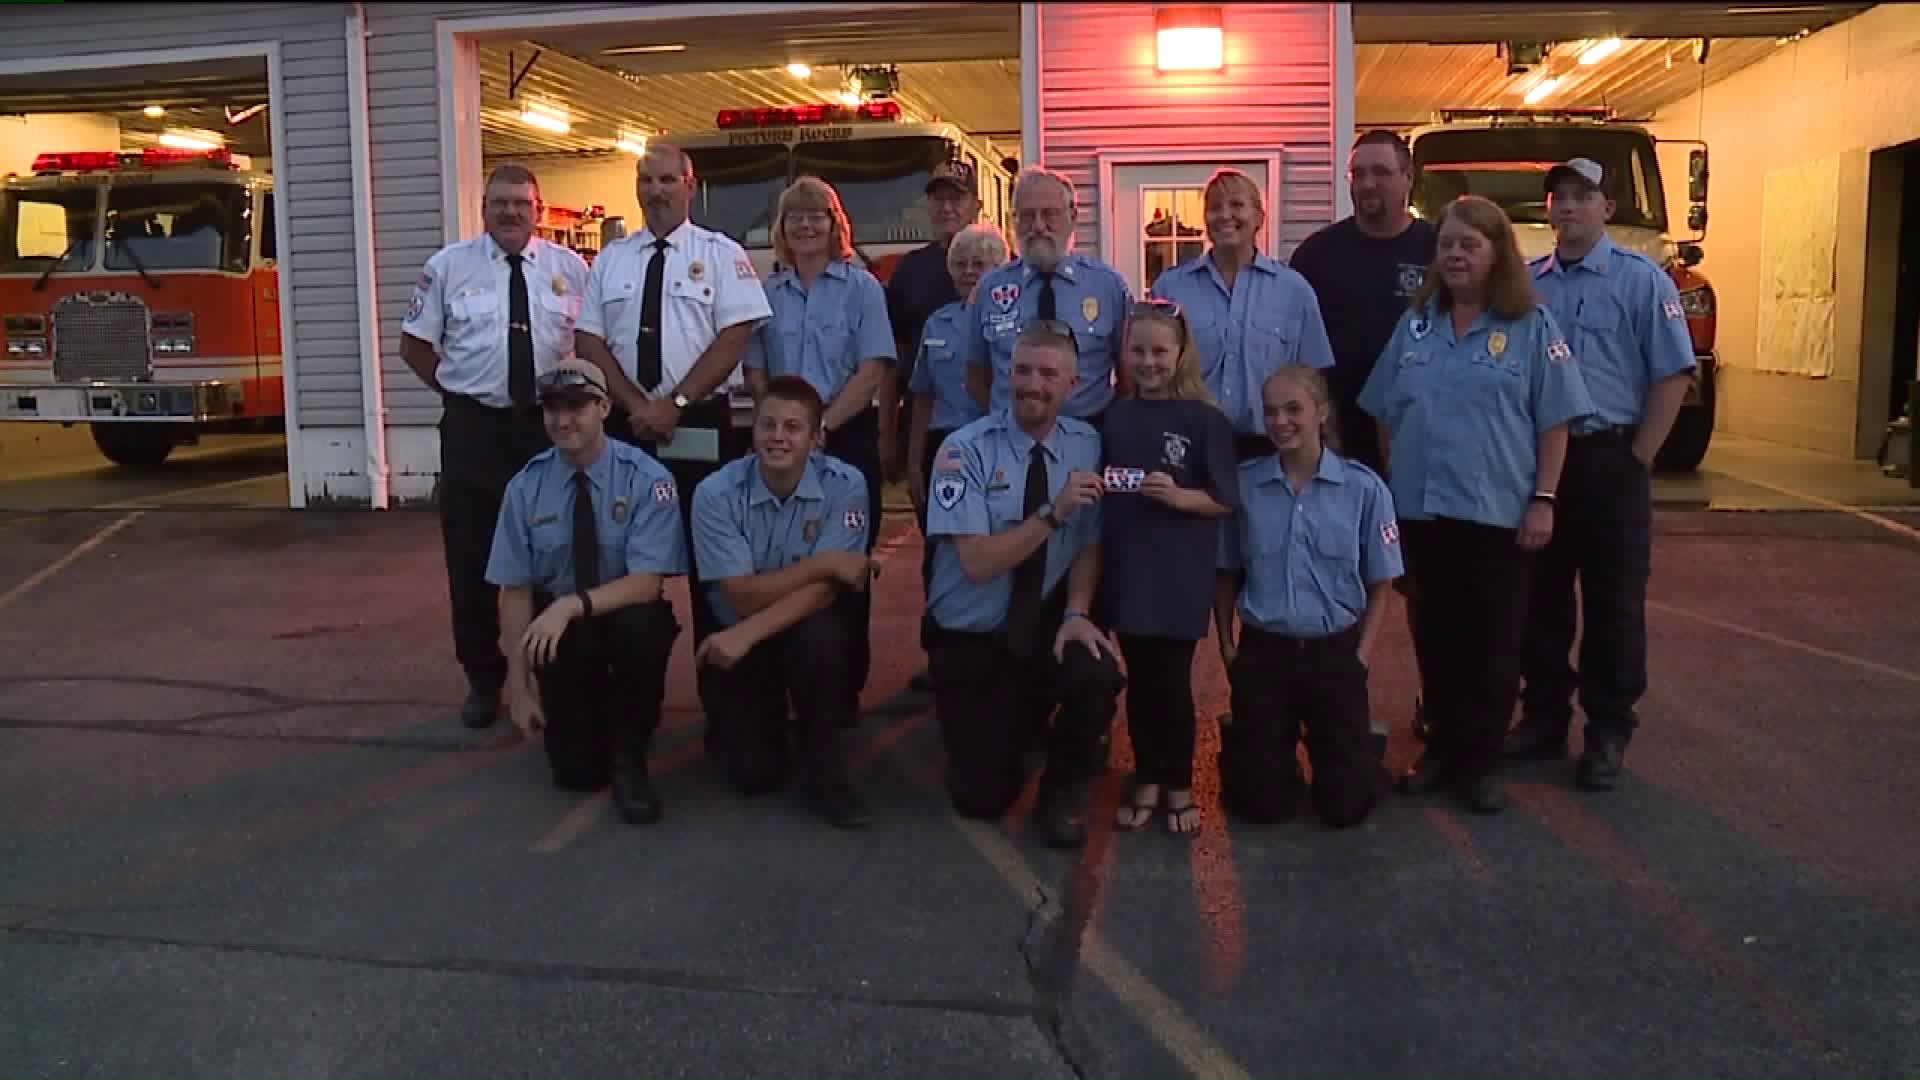 Young Girl Raises Money for First Responders